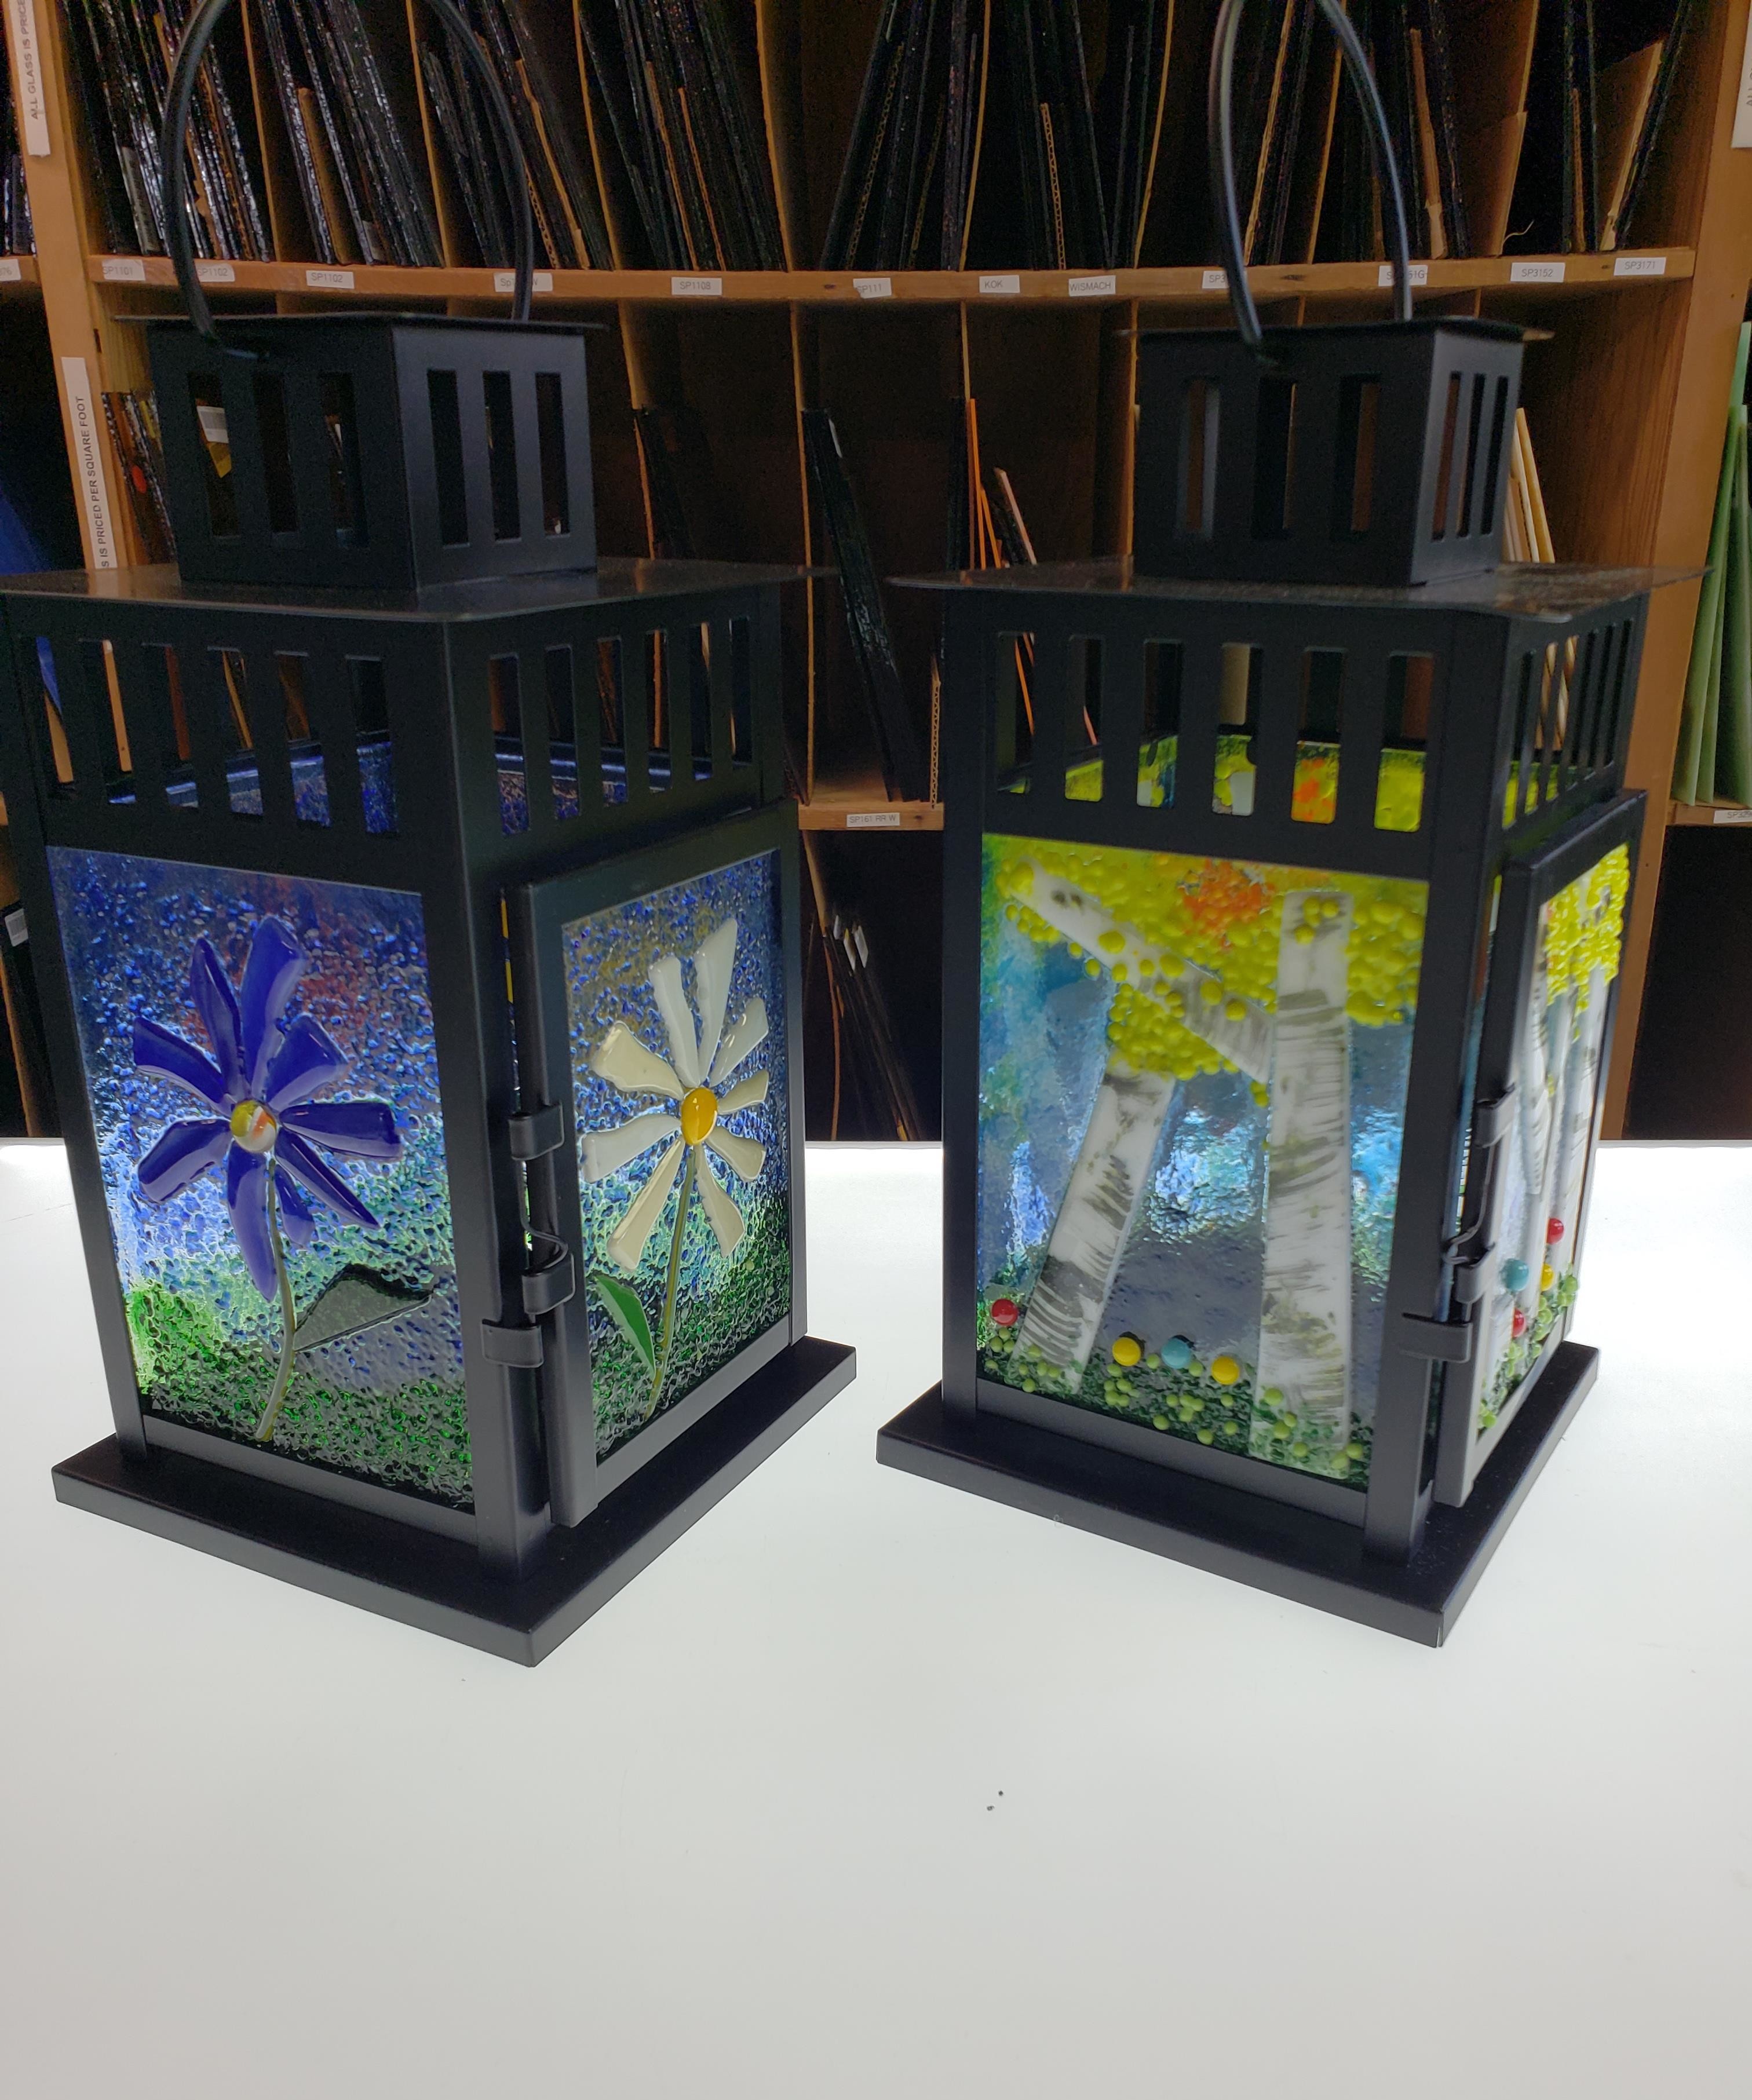 <strong><span style="font-family:arial black,sans-serif"><span style="font-size:22.0pt">Fused Glass Lantern</span></span></strong>